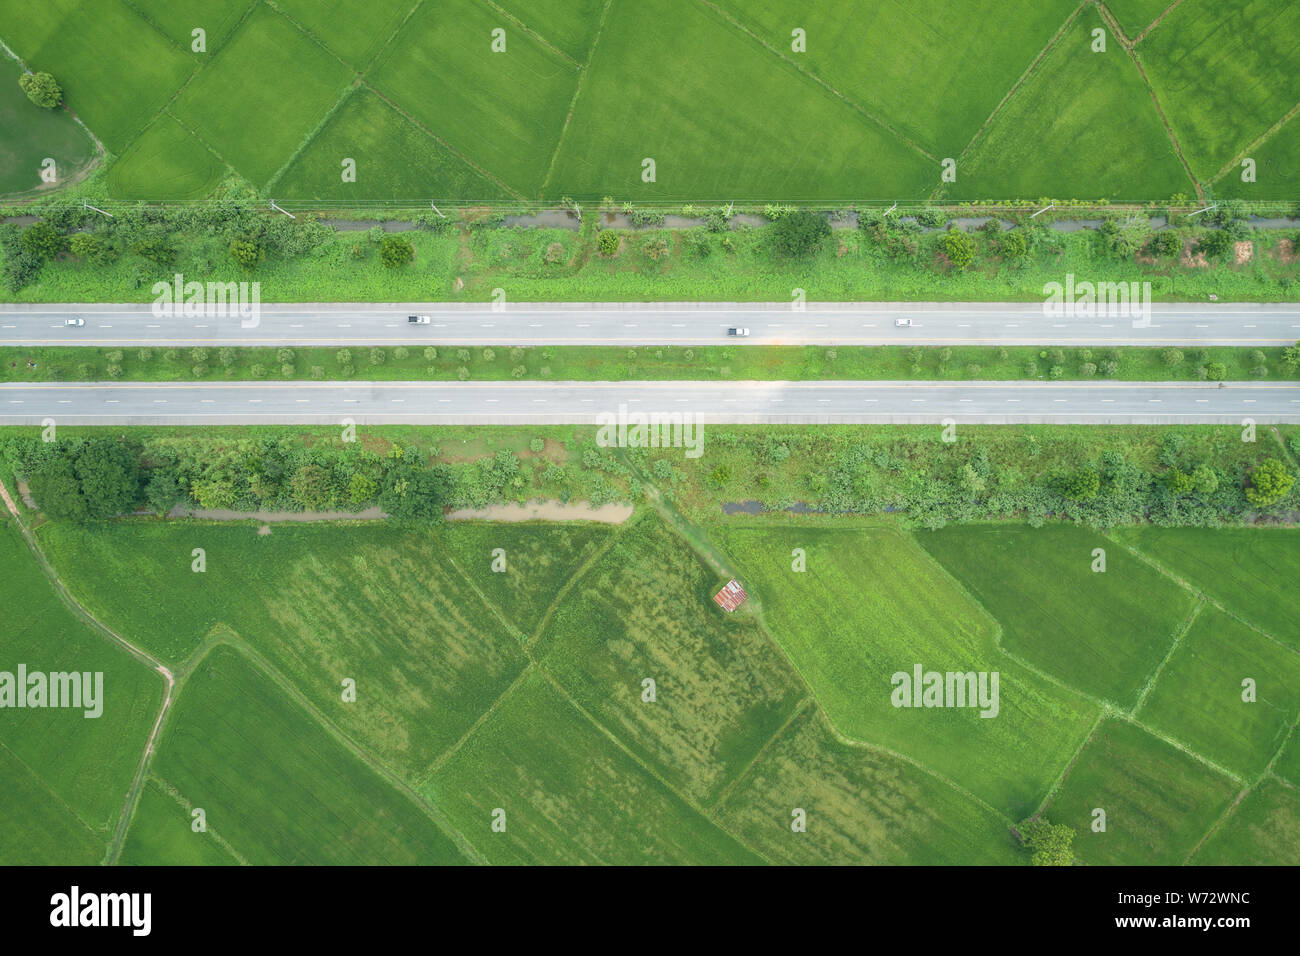 Top view asphalt road in the middle of green young rice fields Stock Photo